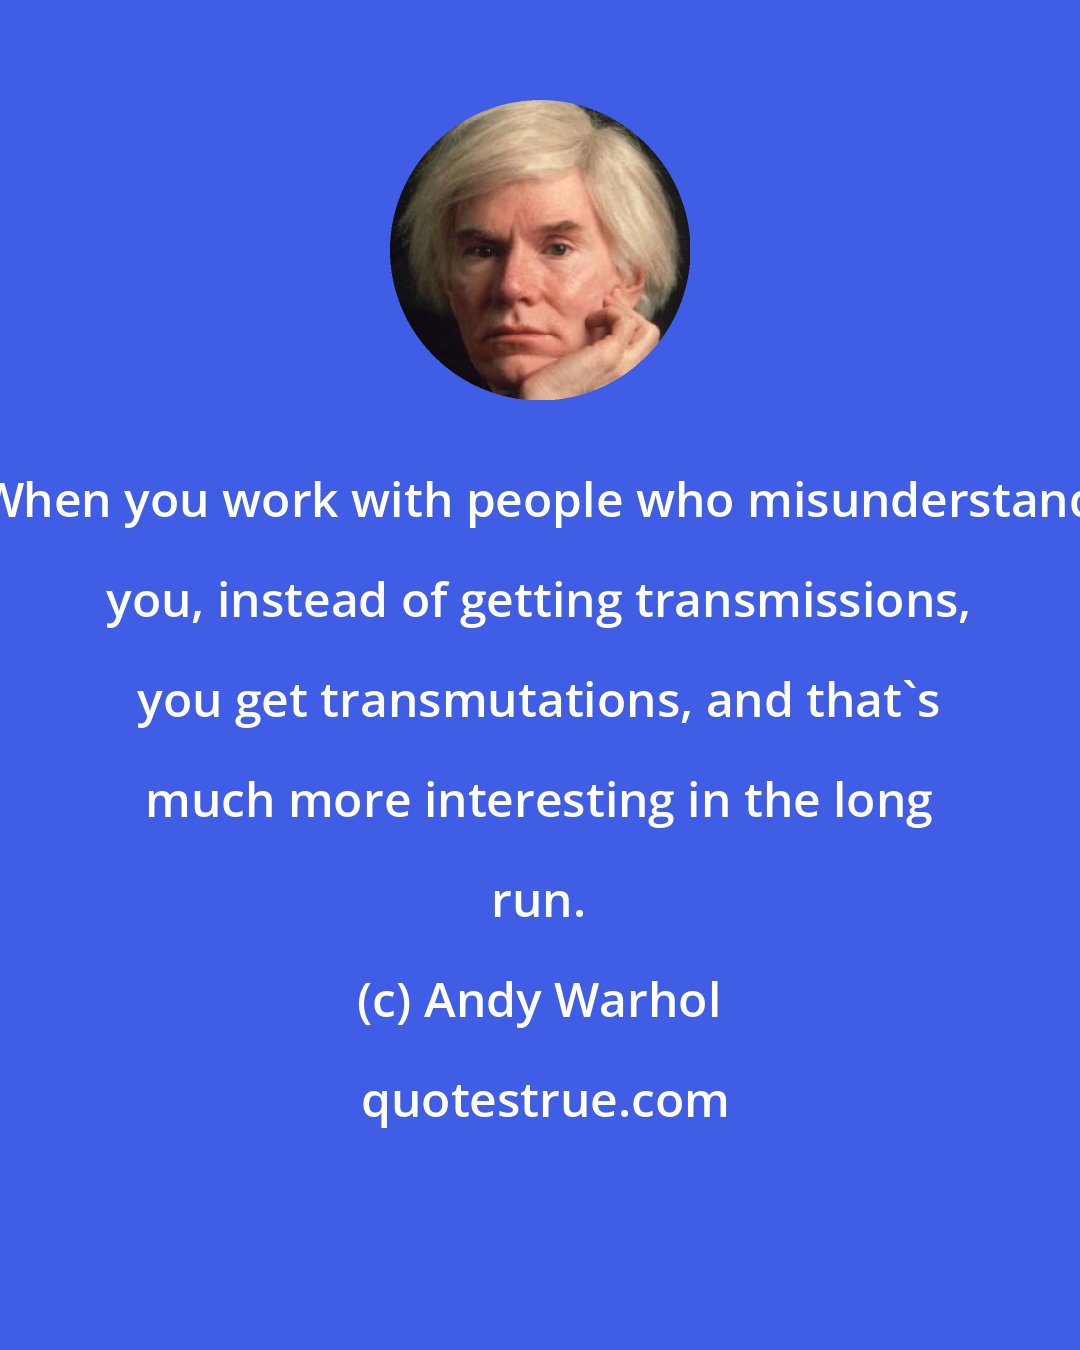 Andy Warhol: When you work with people who misunderstand you, instead of getting transmissions, you get transmutations, and that's much more interesting in the long run.